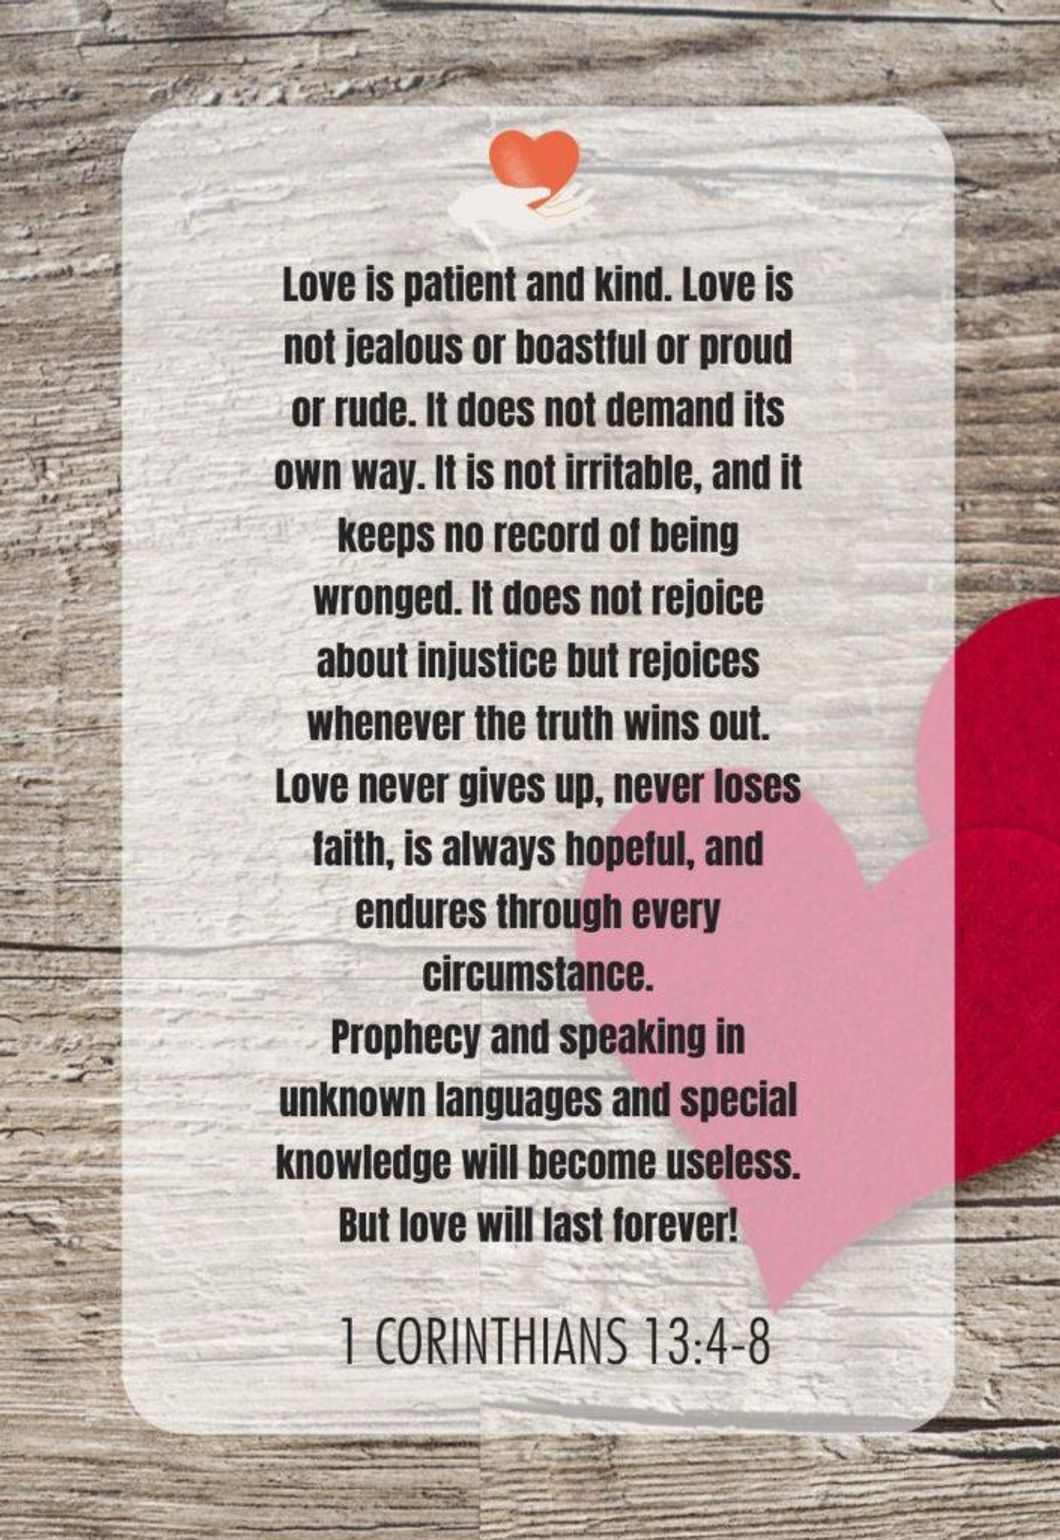 Love is Patient - Bible Meaning of 1 Corinthians 13